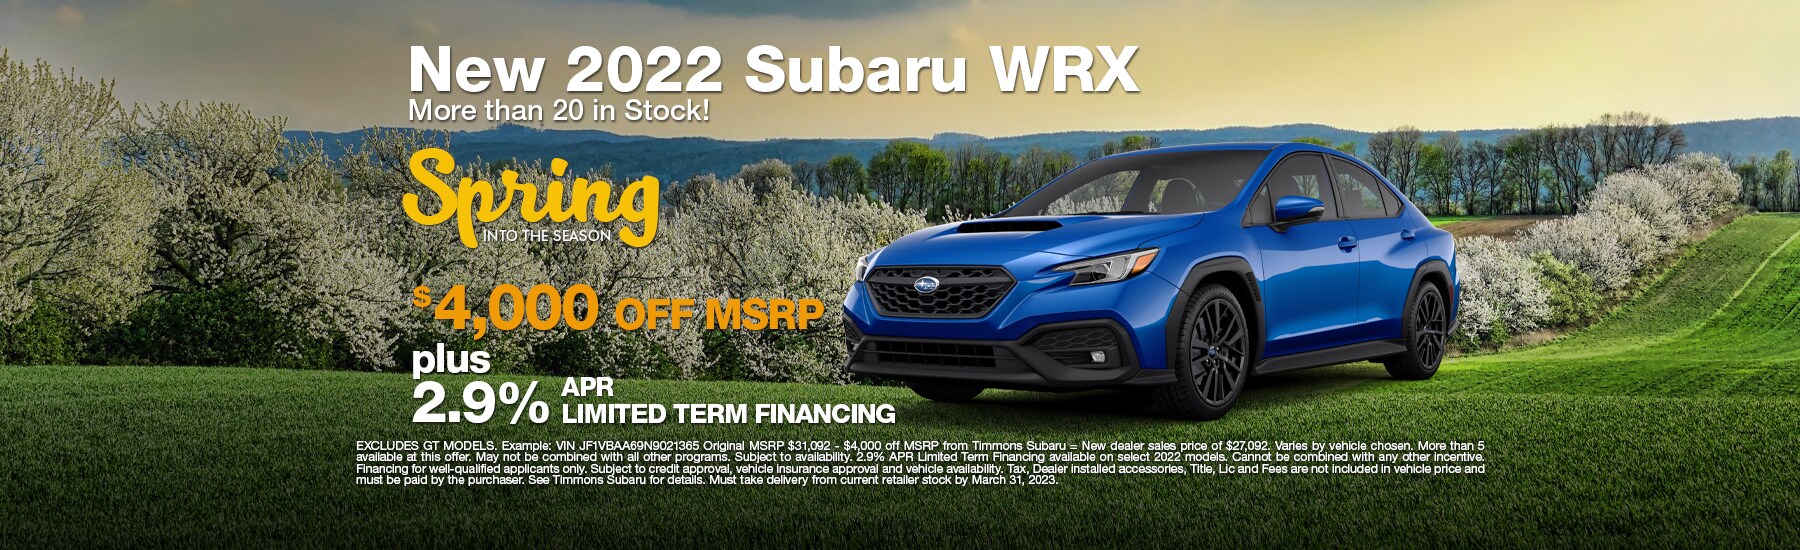 Special Offer on WRX at Timmons Subaru of Long Beach